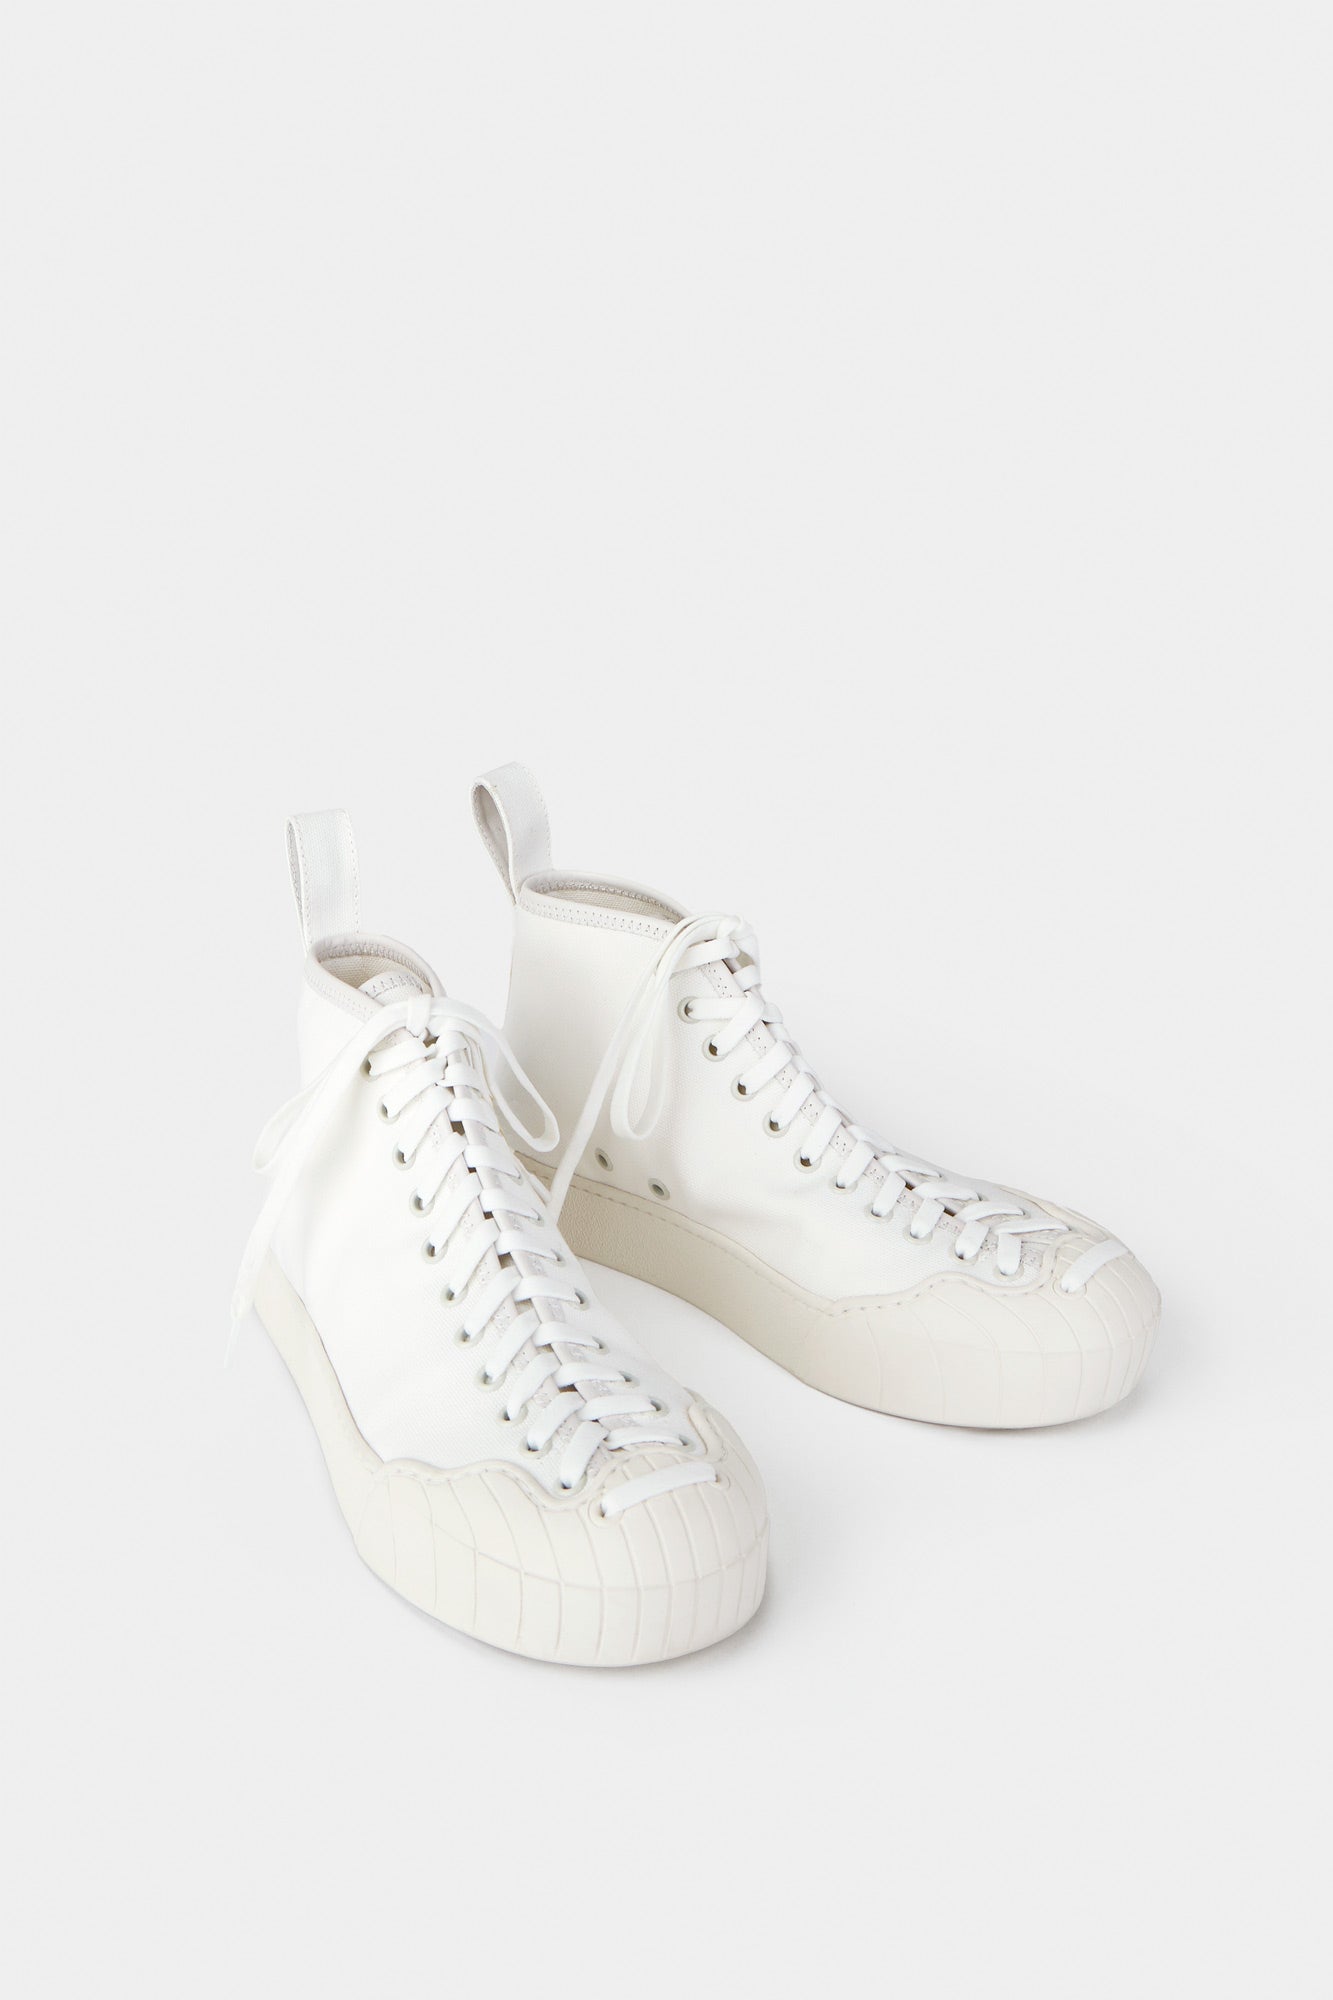 ISI SHOES / white